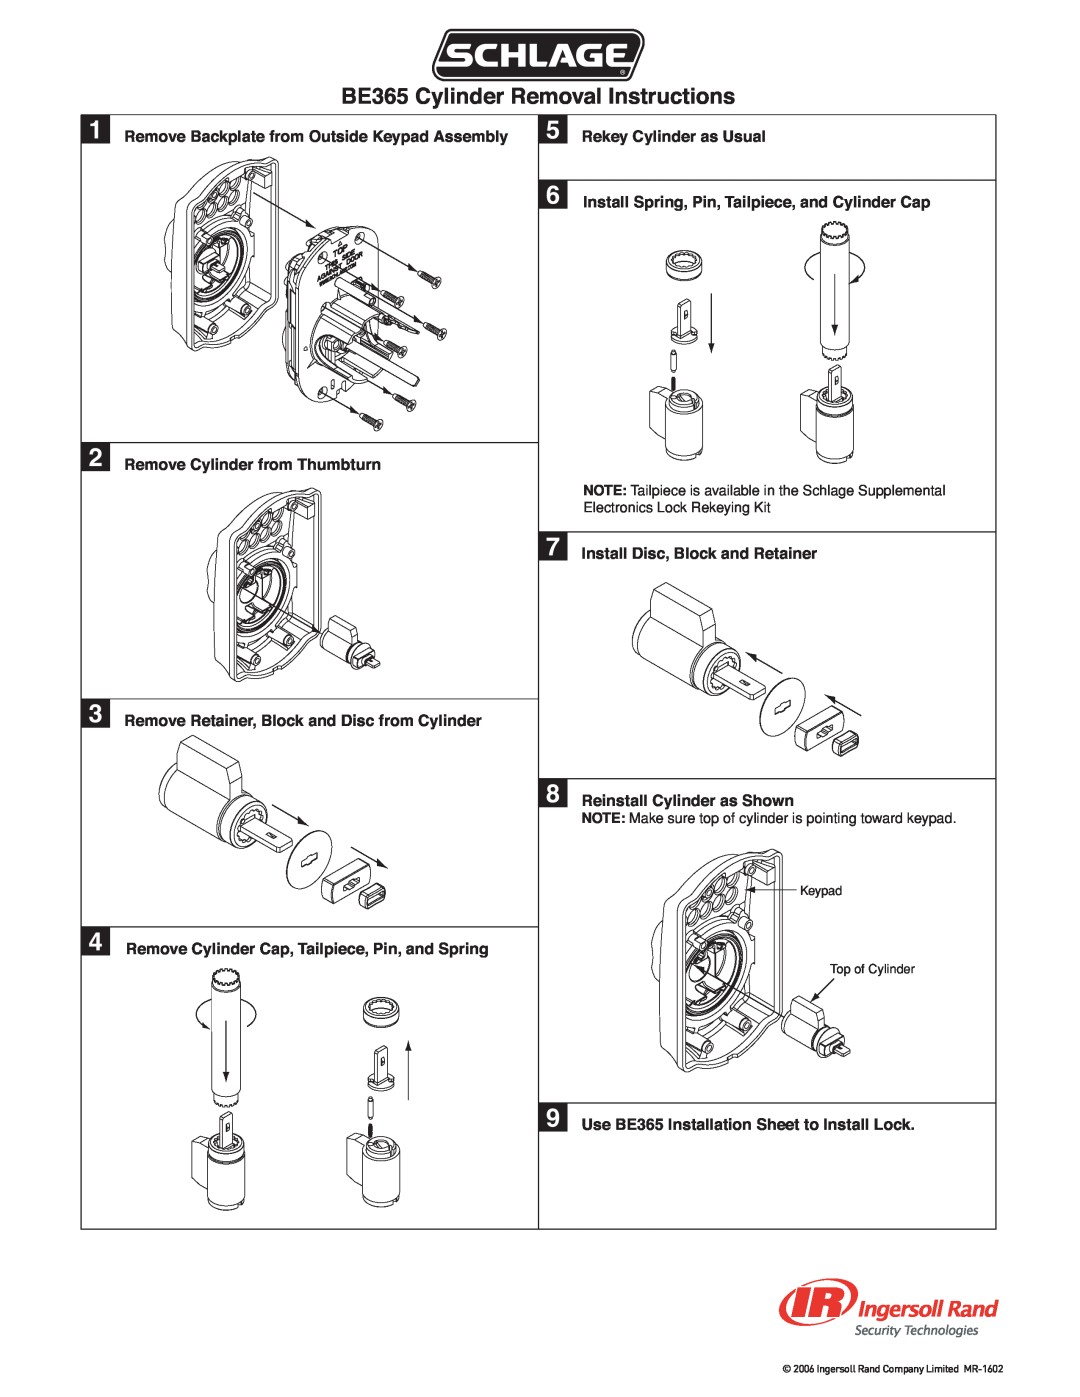 Ingersoll-Rand manual BE365 Cylinder Removal Instructions 